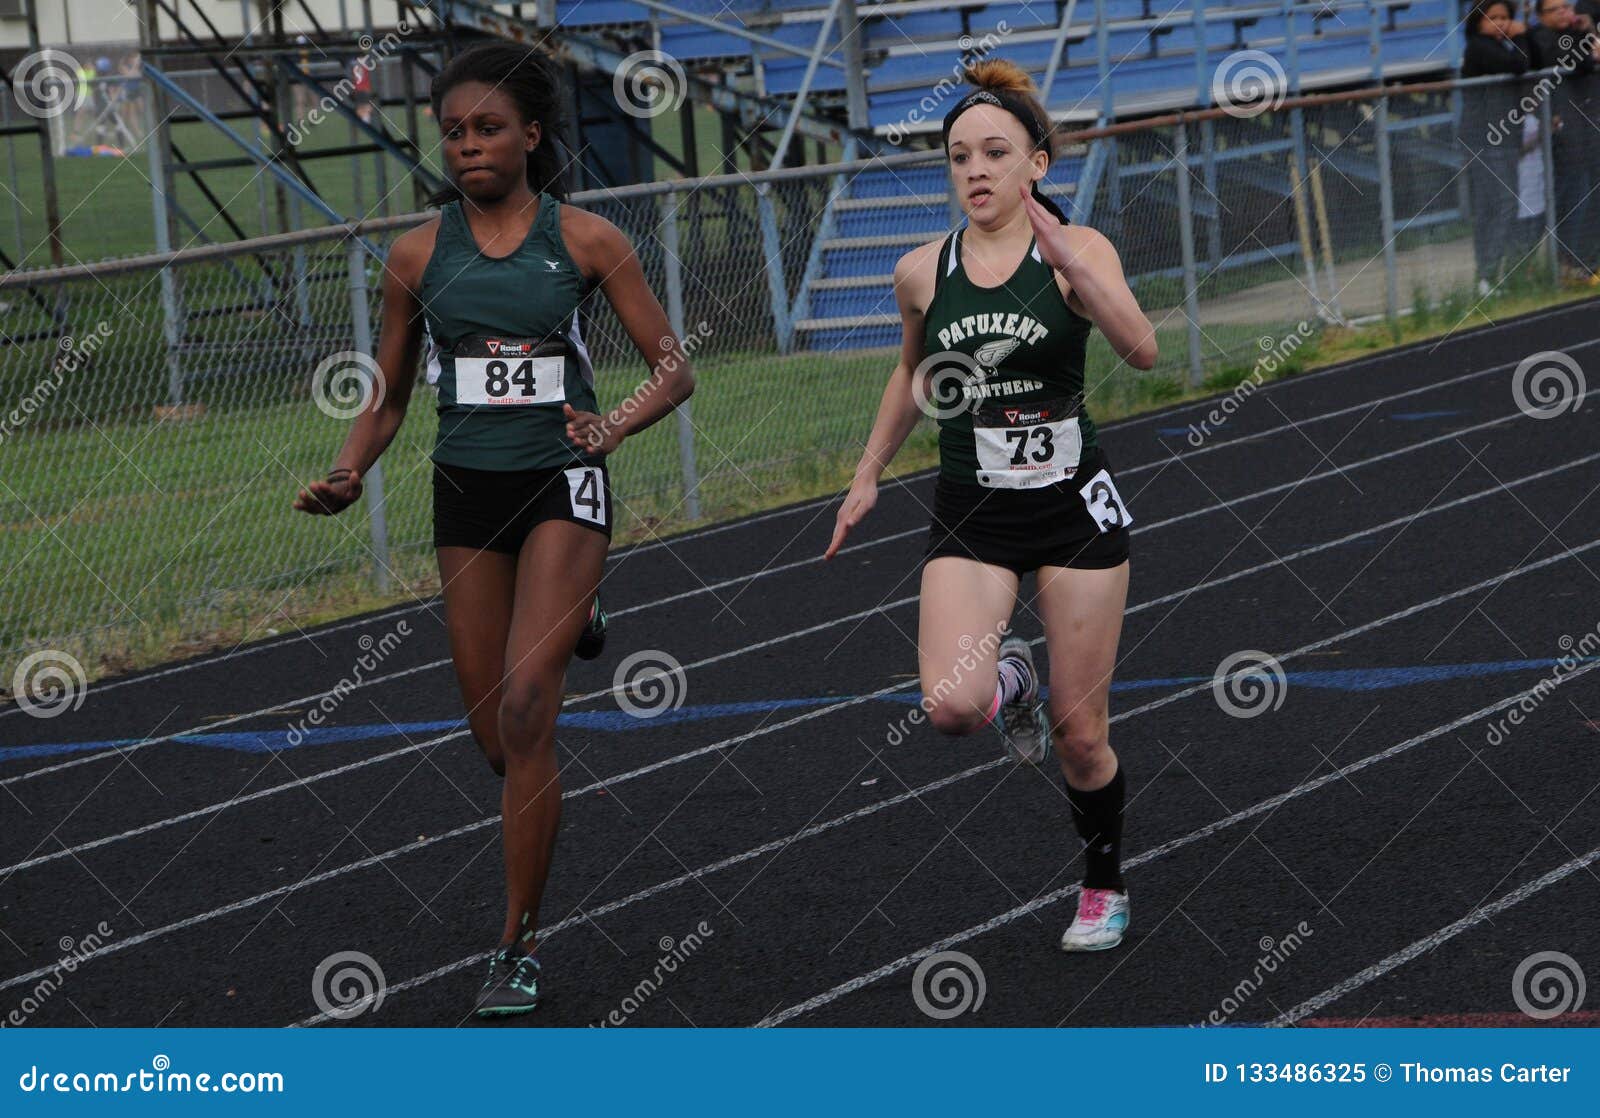 2 591 High School Track Photos Free Royalty Free Stock Photos From Dreamstime